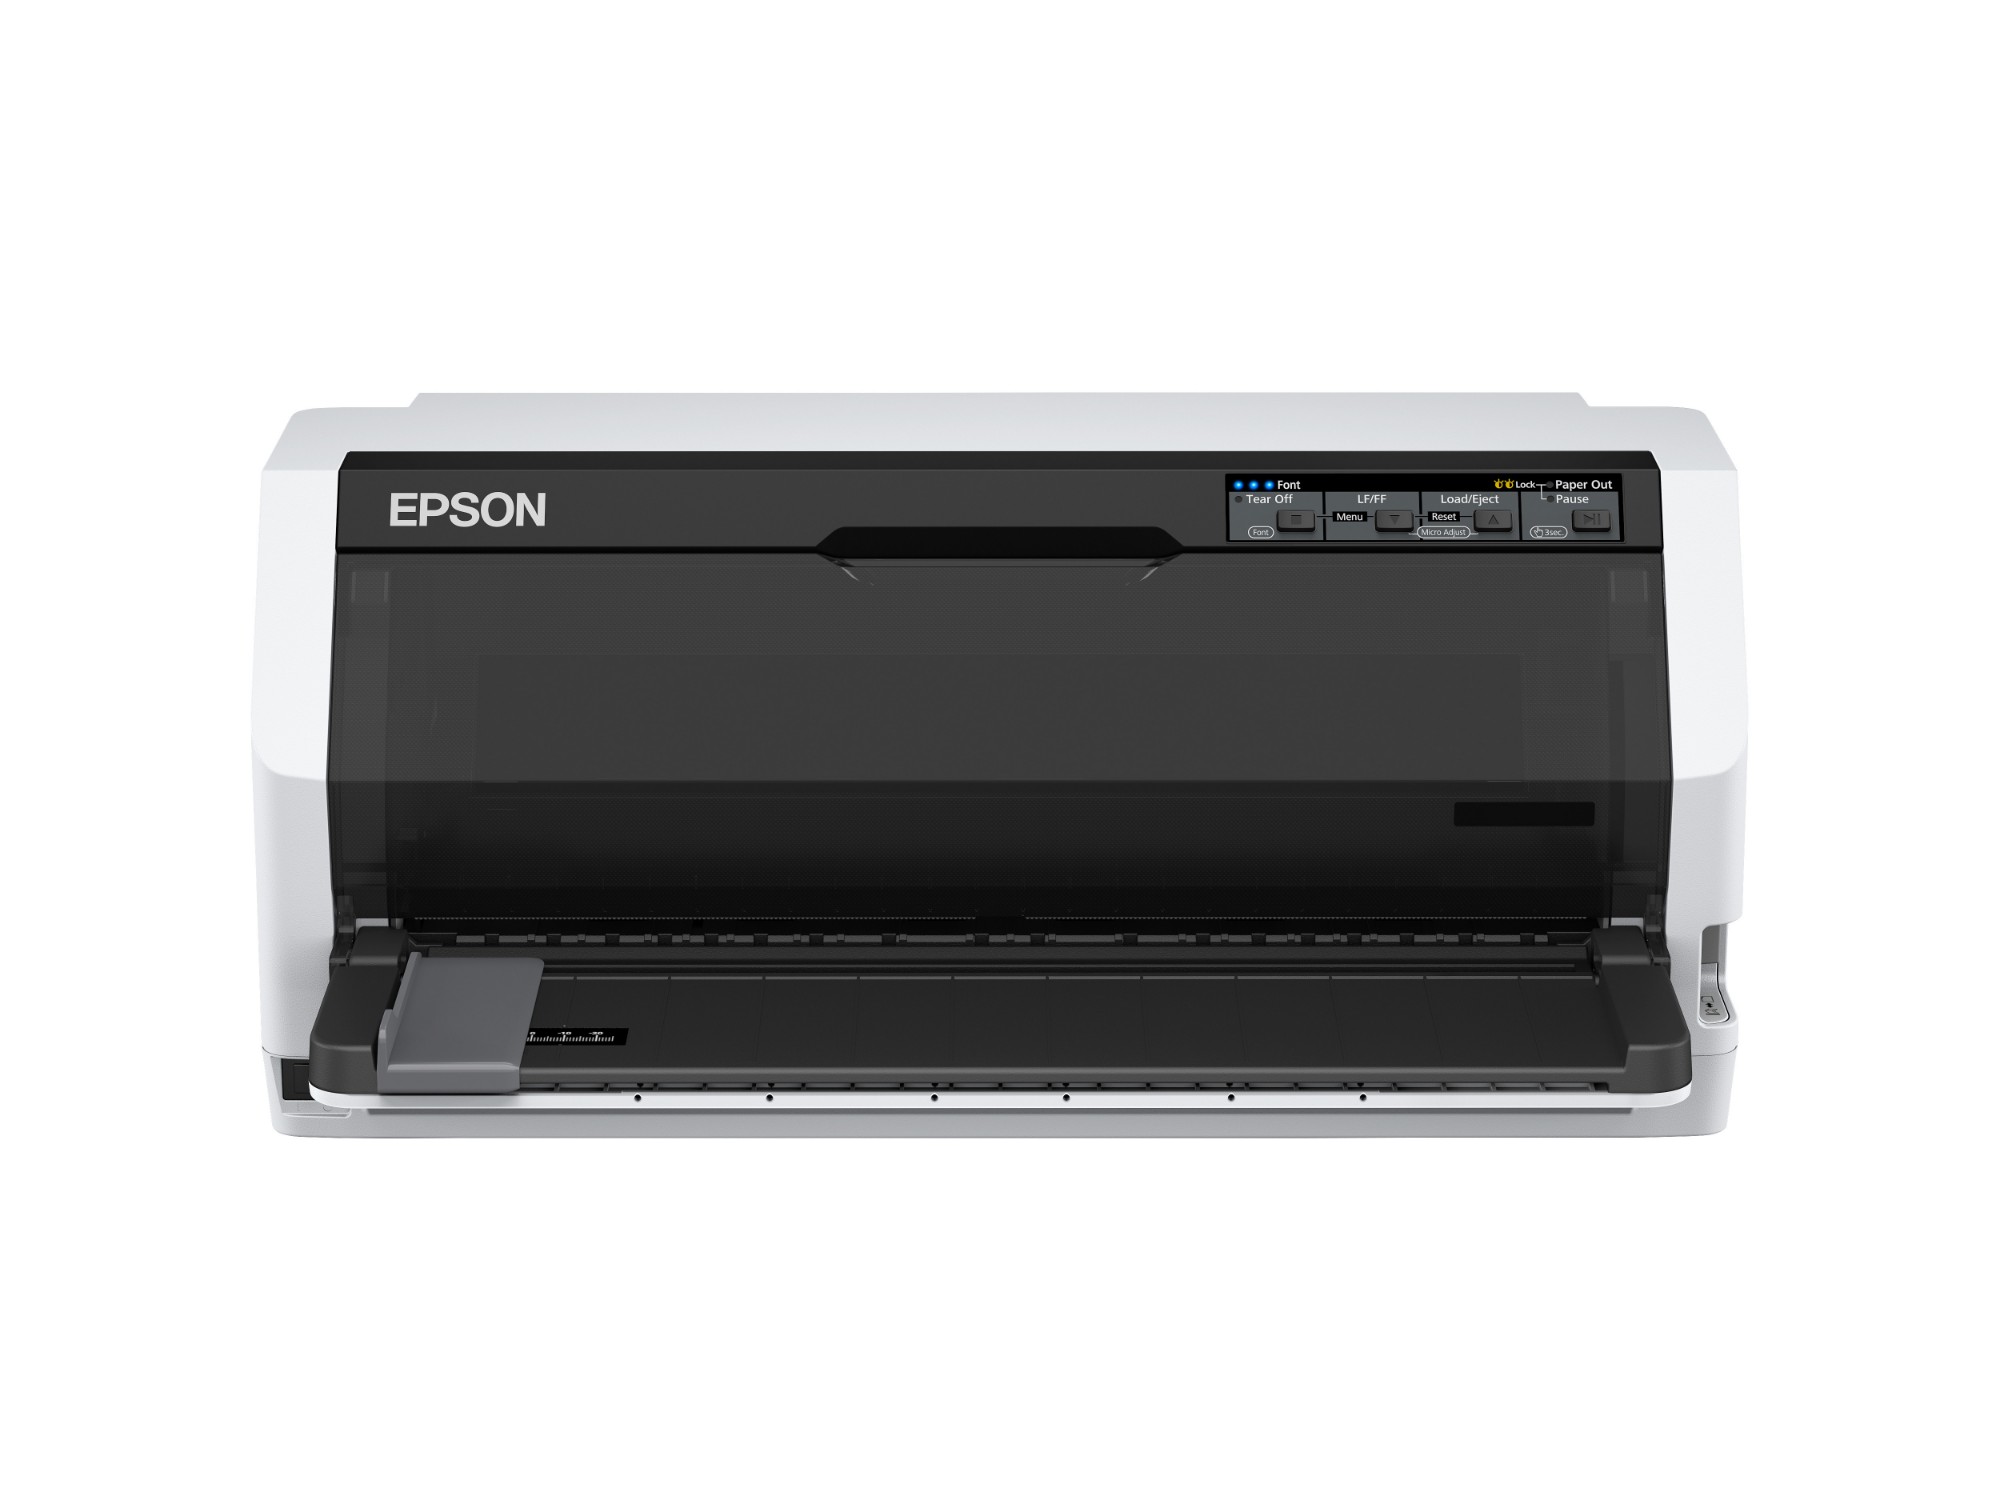 C11CJ81401A0 EPSON LQ 780 - Printer - B/W - dot-matrix - A3 - 360 x 180 dpi - 24 pin - up to 487 char/sec - parallel, USB 2.0